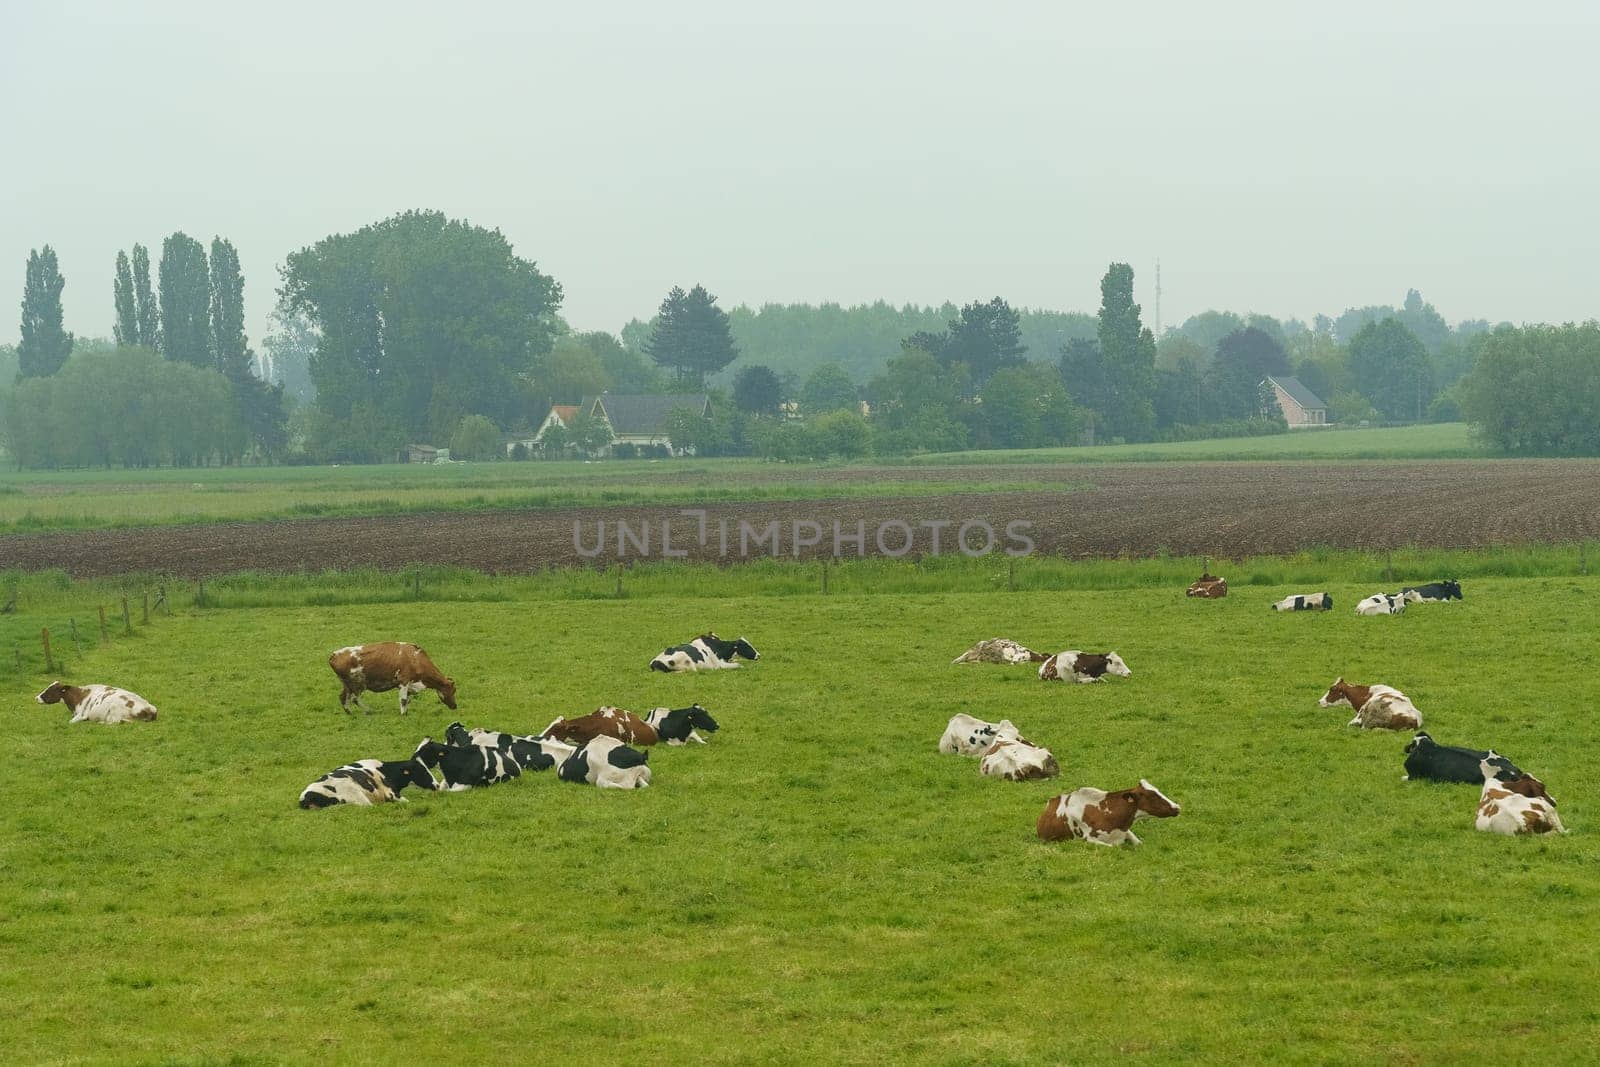 Calm rural scene with cows grazing in a lush green pasture in cloudy weather. by Sd28DimoN_1976